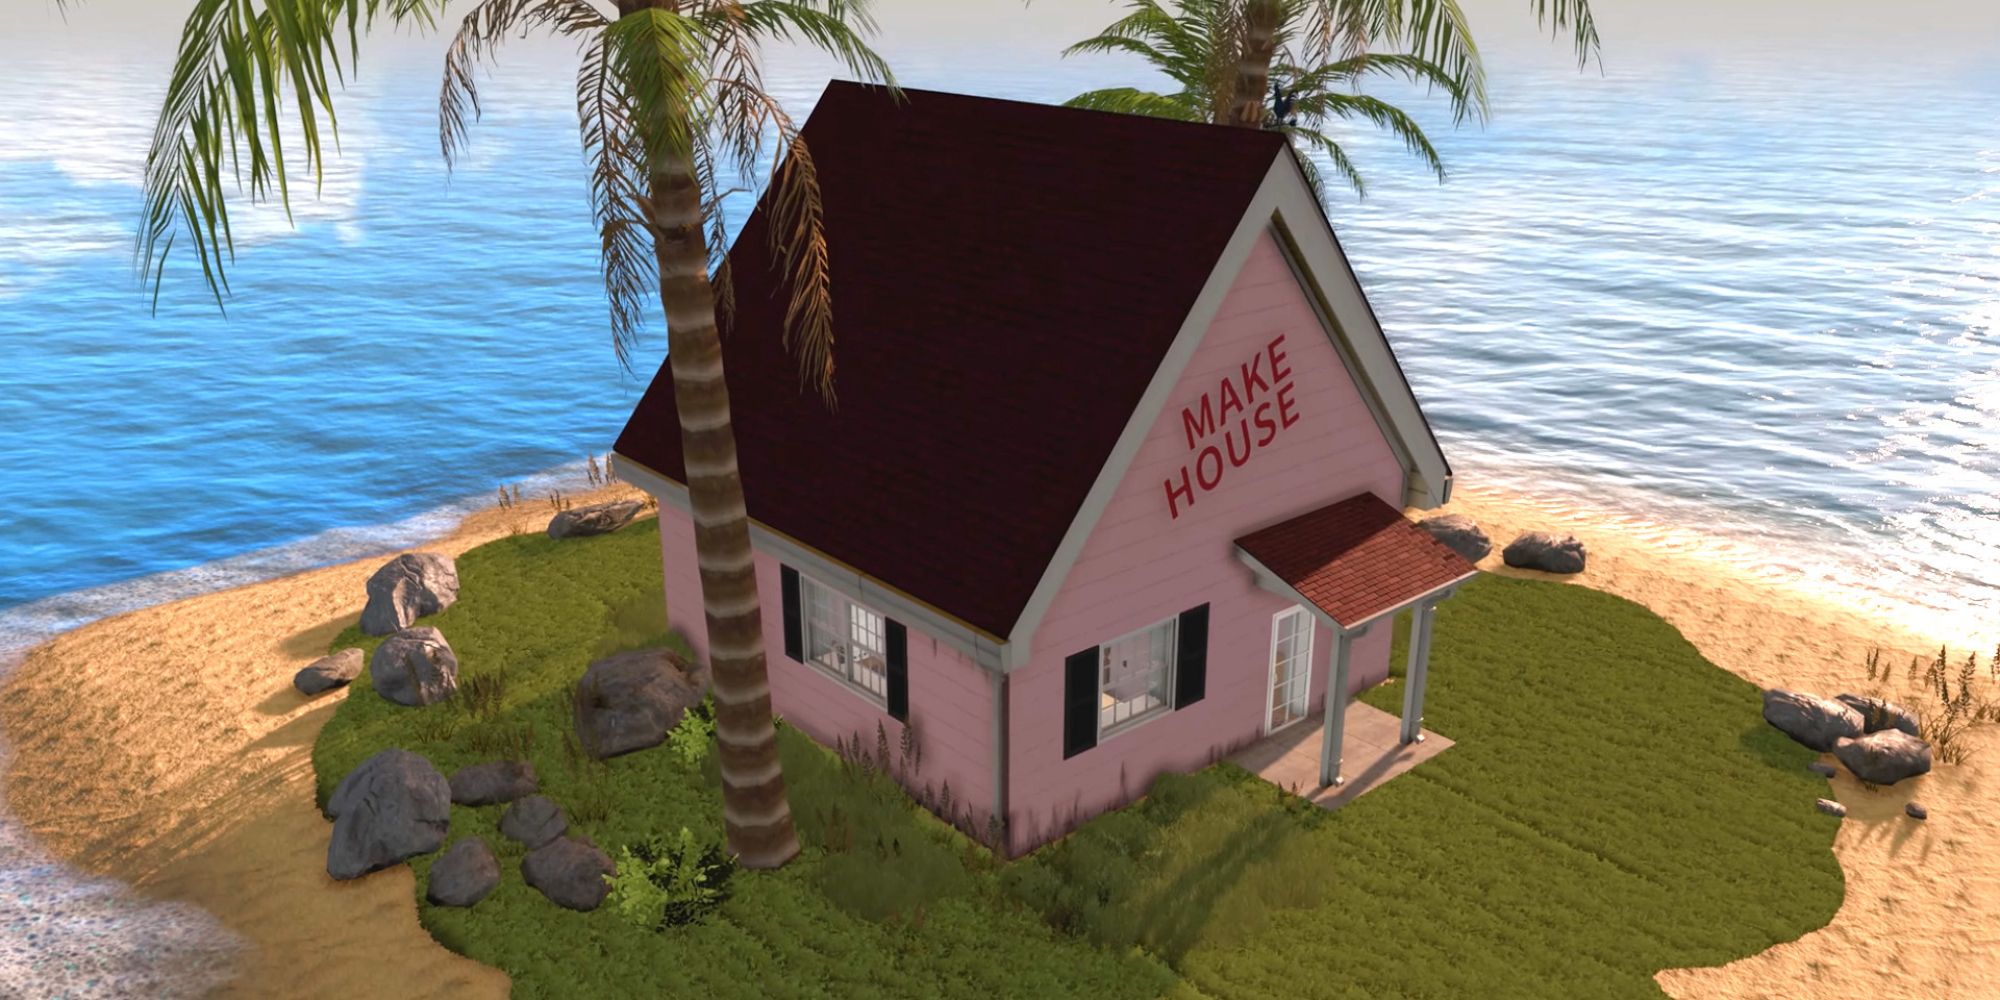 A small, simple house that says "make house" on the front